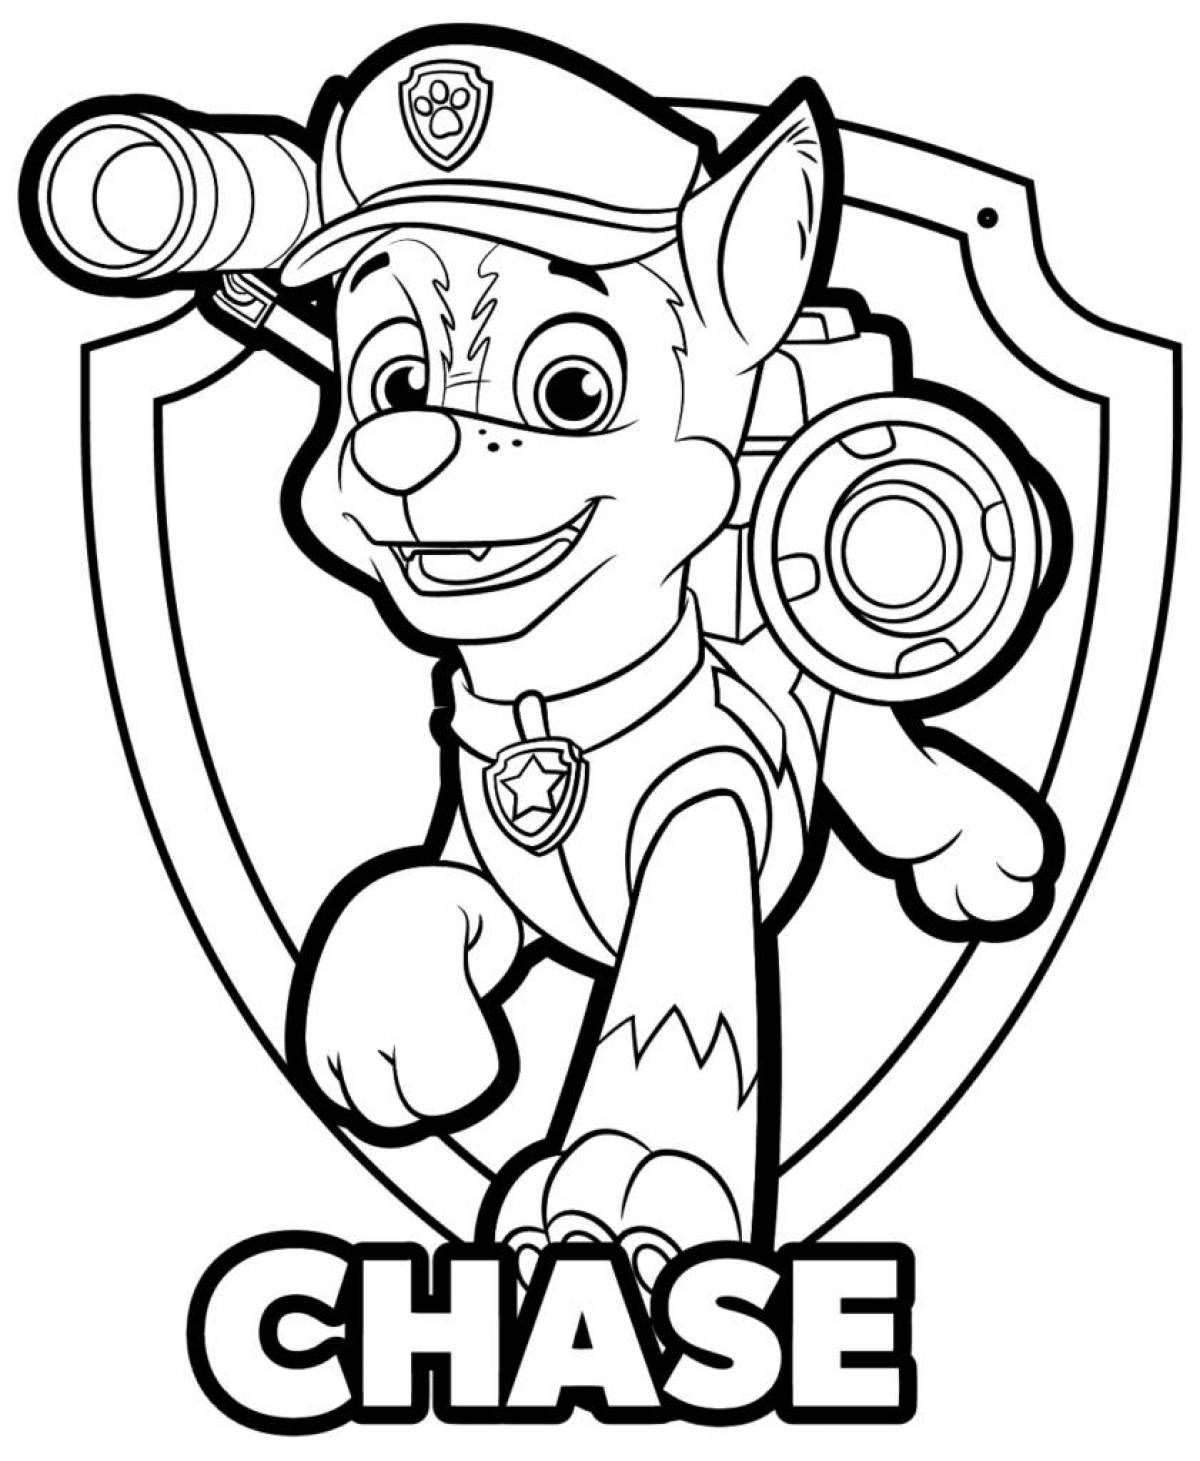 Rocky paw patrol freaky coloring book